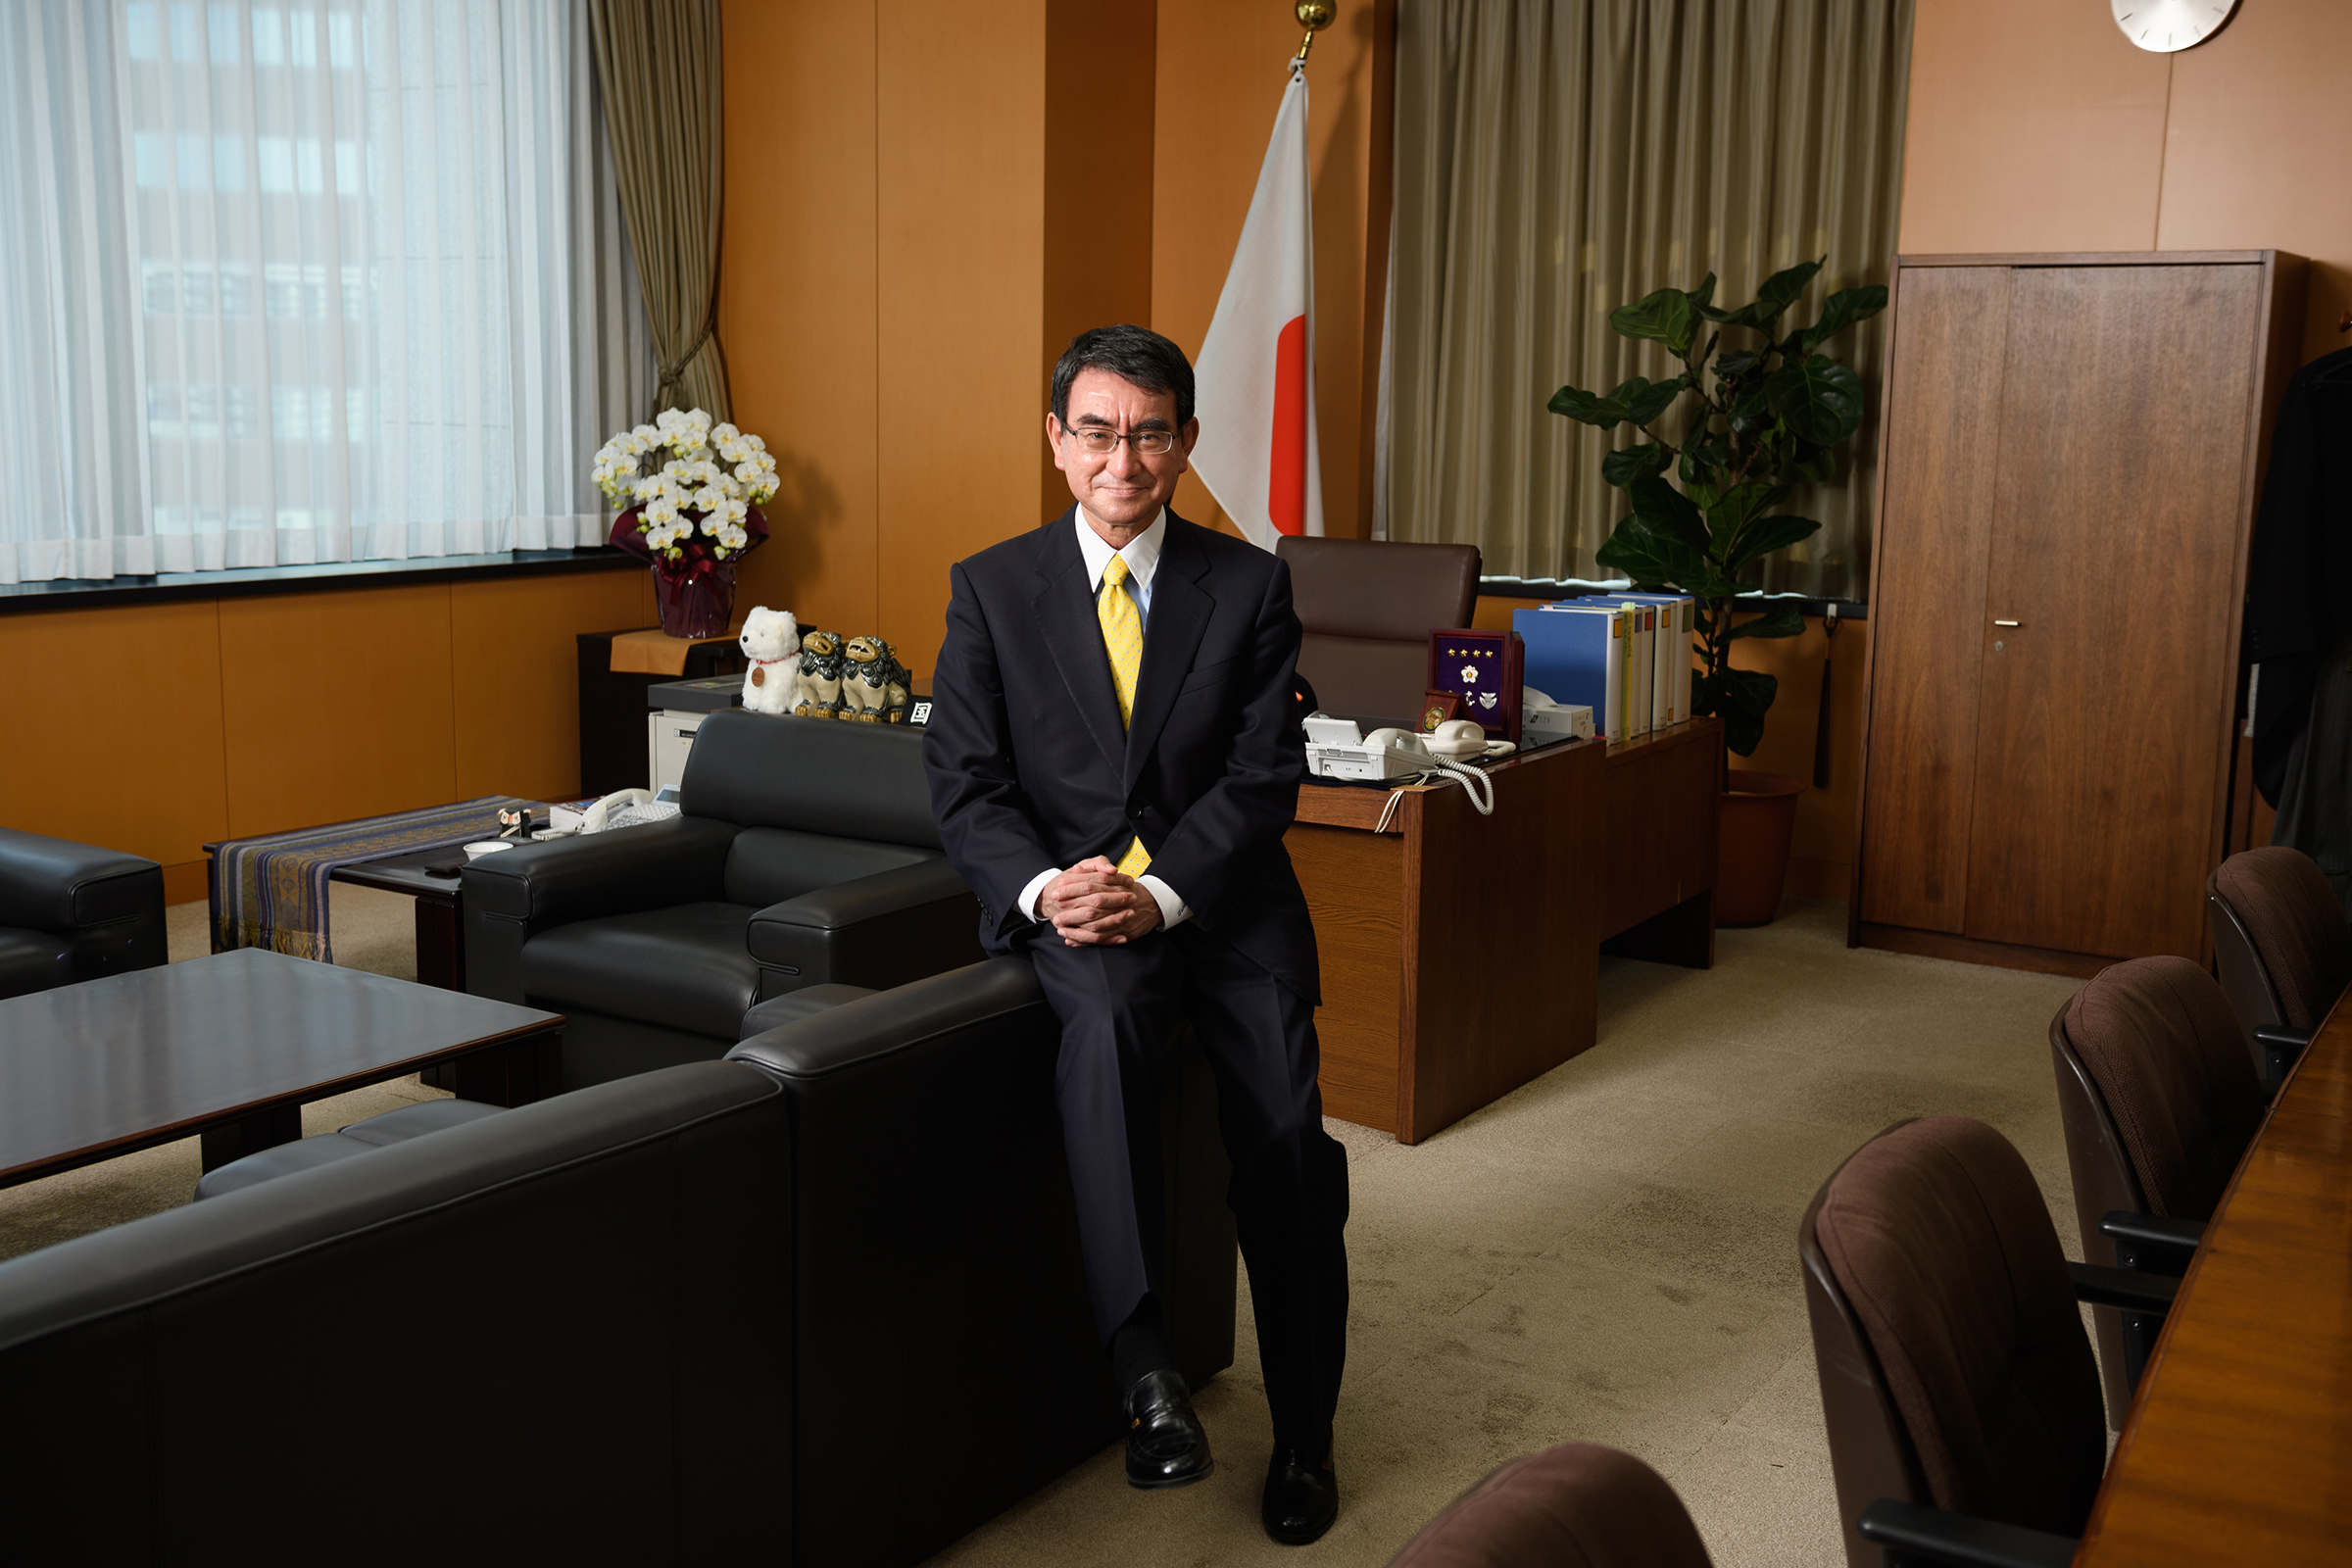 Taro Kono, Japan's then regulatory reform and vaccine minister, in Tokyo, on March 29, 2021. (Akio Kon—Bloomberg/Getty Images)